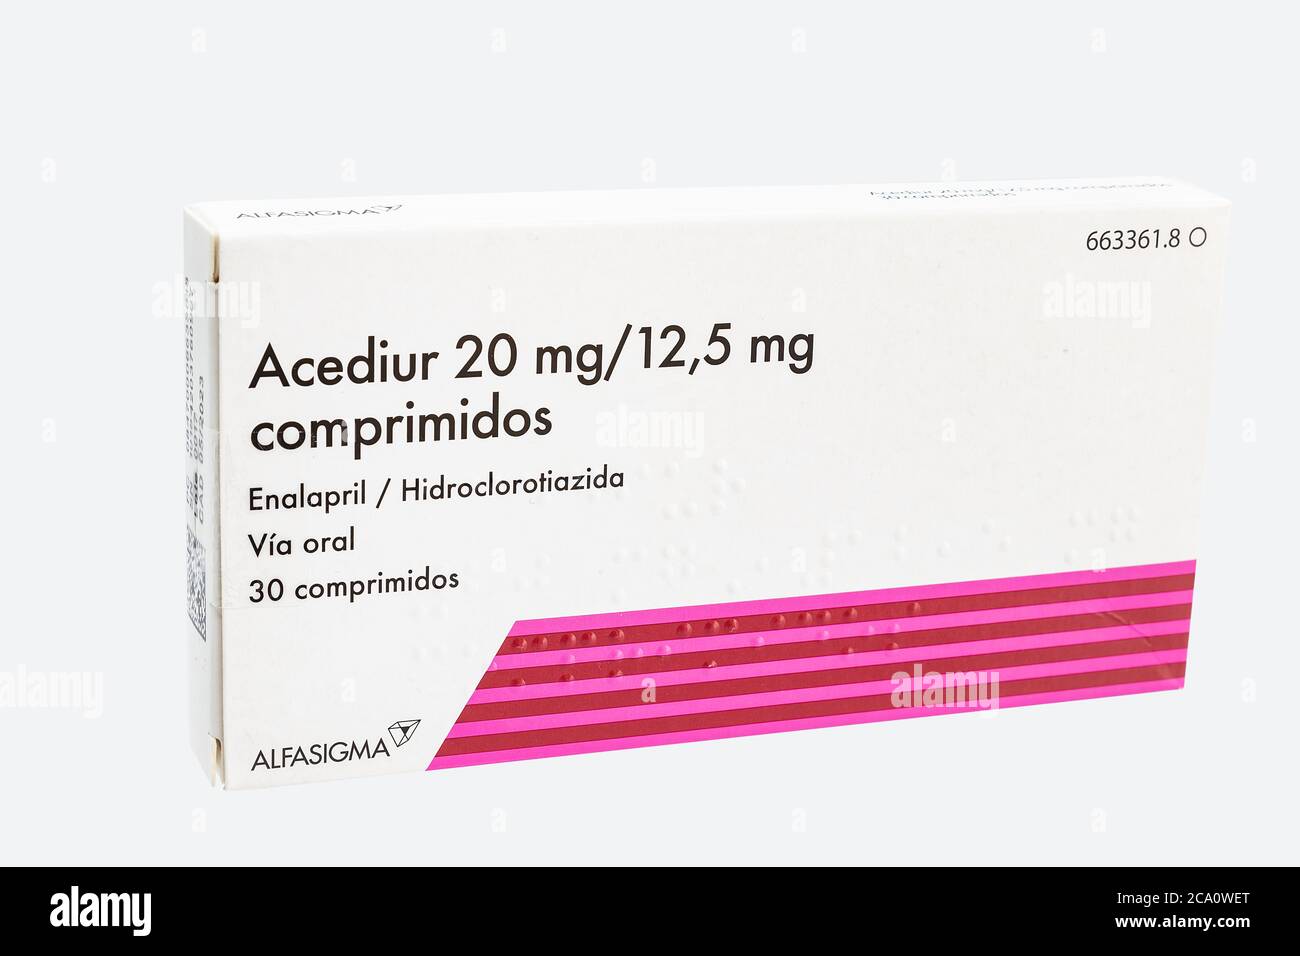 Huelva, Spain - July 23, 2020: Box of a combination of Enalapril Maleate and Hydrochlorothiazide, brand Acediur. Treatment of essential hypertension. Stock Photo